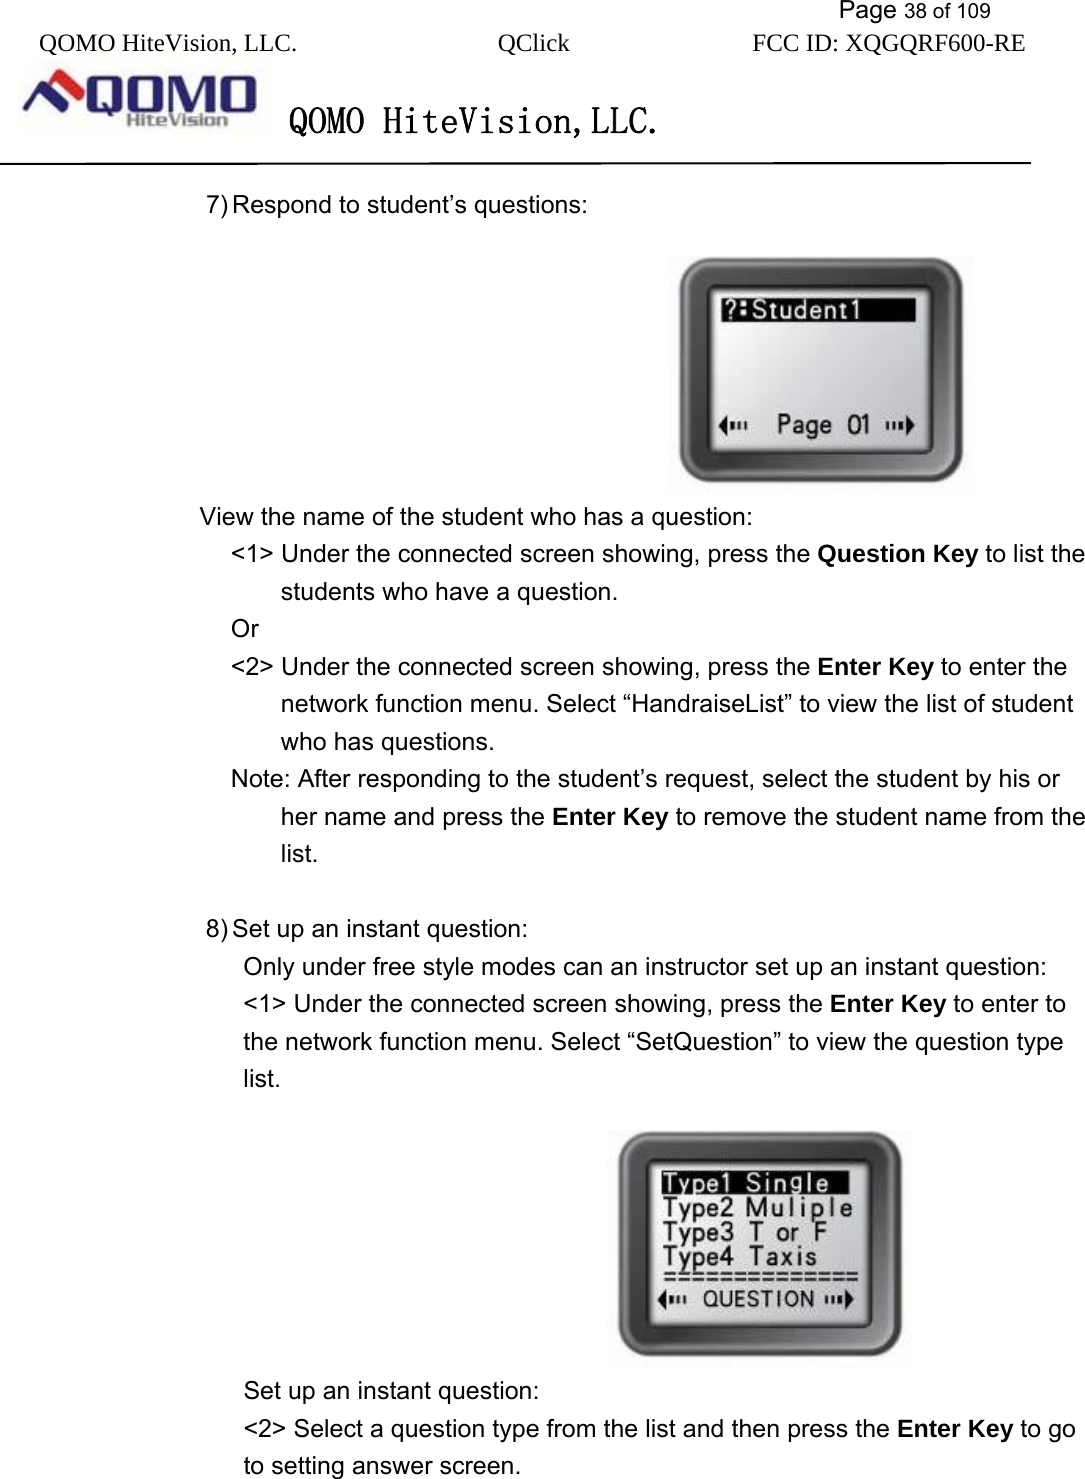           Page 38 of 109 QOMO HiteVision, LLC.  QClick        FCC ID: XQGQRF600-RE     QOMO HiteVision,LLC.   7) Respond to student’s questions:                                             View the name of the student who has a question: &lt;1&gt; Under the connected screen showing, press the Question Key to list the students who have a question.   Or &lt;2&gt; Under the connected screen showing, press the Enter Key to enter the network function menu. Select “HandraiseList” to view the list of student who has questions. Note: After responding to the student’s request, select the student by his or her name and press the Enter Key to remove the student name from the list.  8) Set up an instant question: Only under free style modes can an instructor set up an instant question: &lt;1&gt; Under the connected screen showing, press the Enter Key to enter to the network function menu. Select “SetQuestion” to view the question type list.                                     Set up an instant question: &lt;2&gt; Select a question type from the list and then press the Enter Key to go to setting answer screen.                                                                   